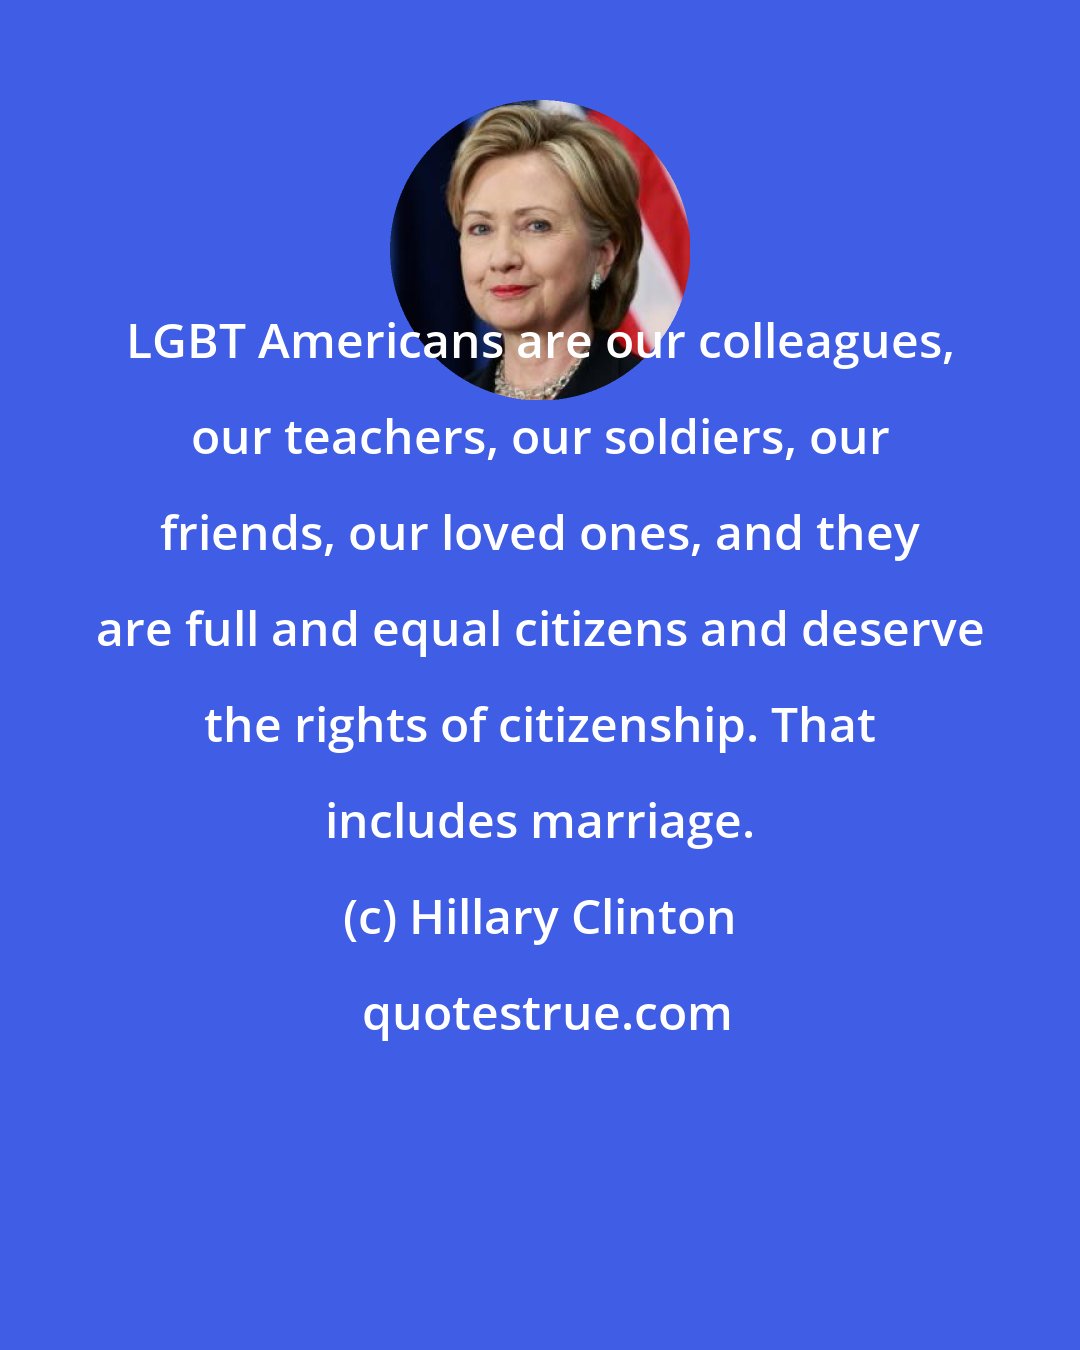 Hillary Clinton: LGBT Americans are our colleagues, our teachers, our soldiers, our friends, our loved ones, and they are full and equal citizens and deserve the rights of citizenship. That includes marriage.